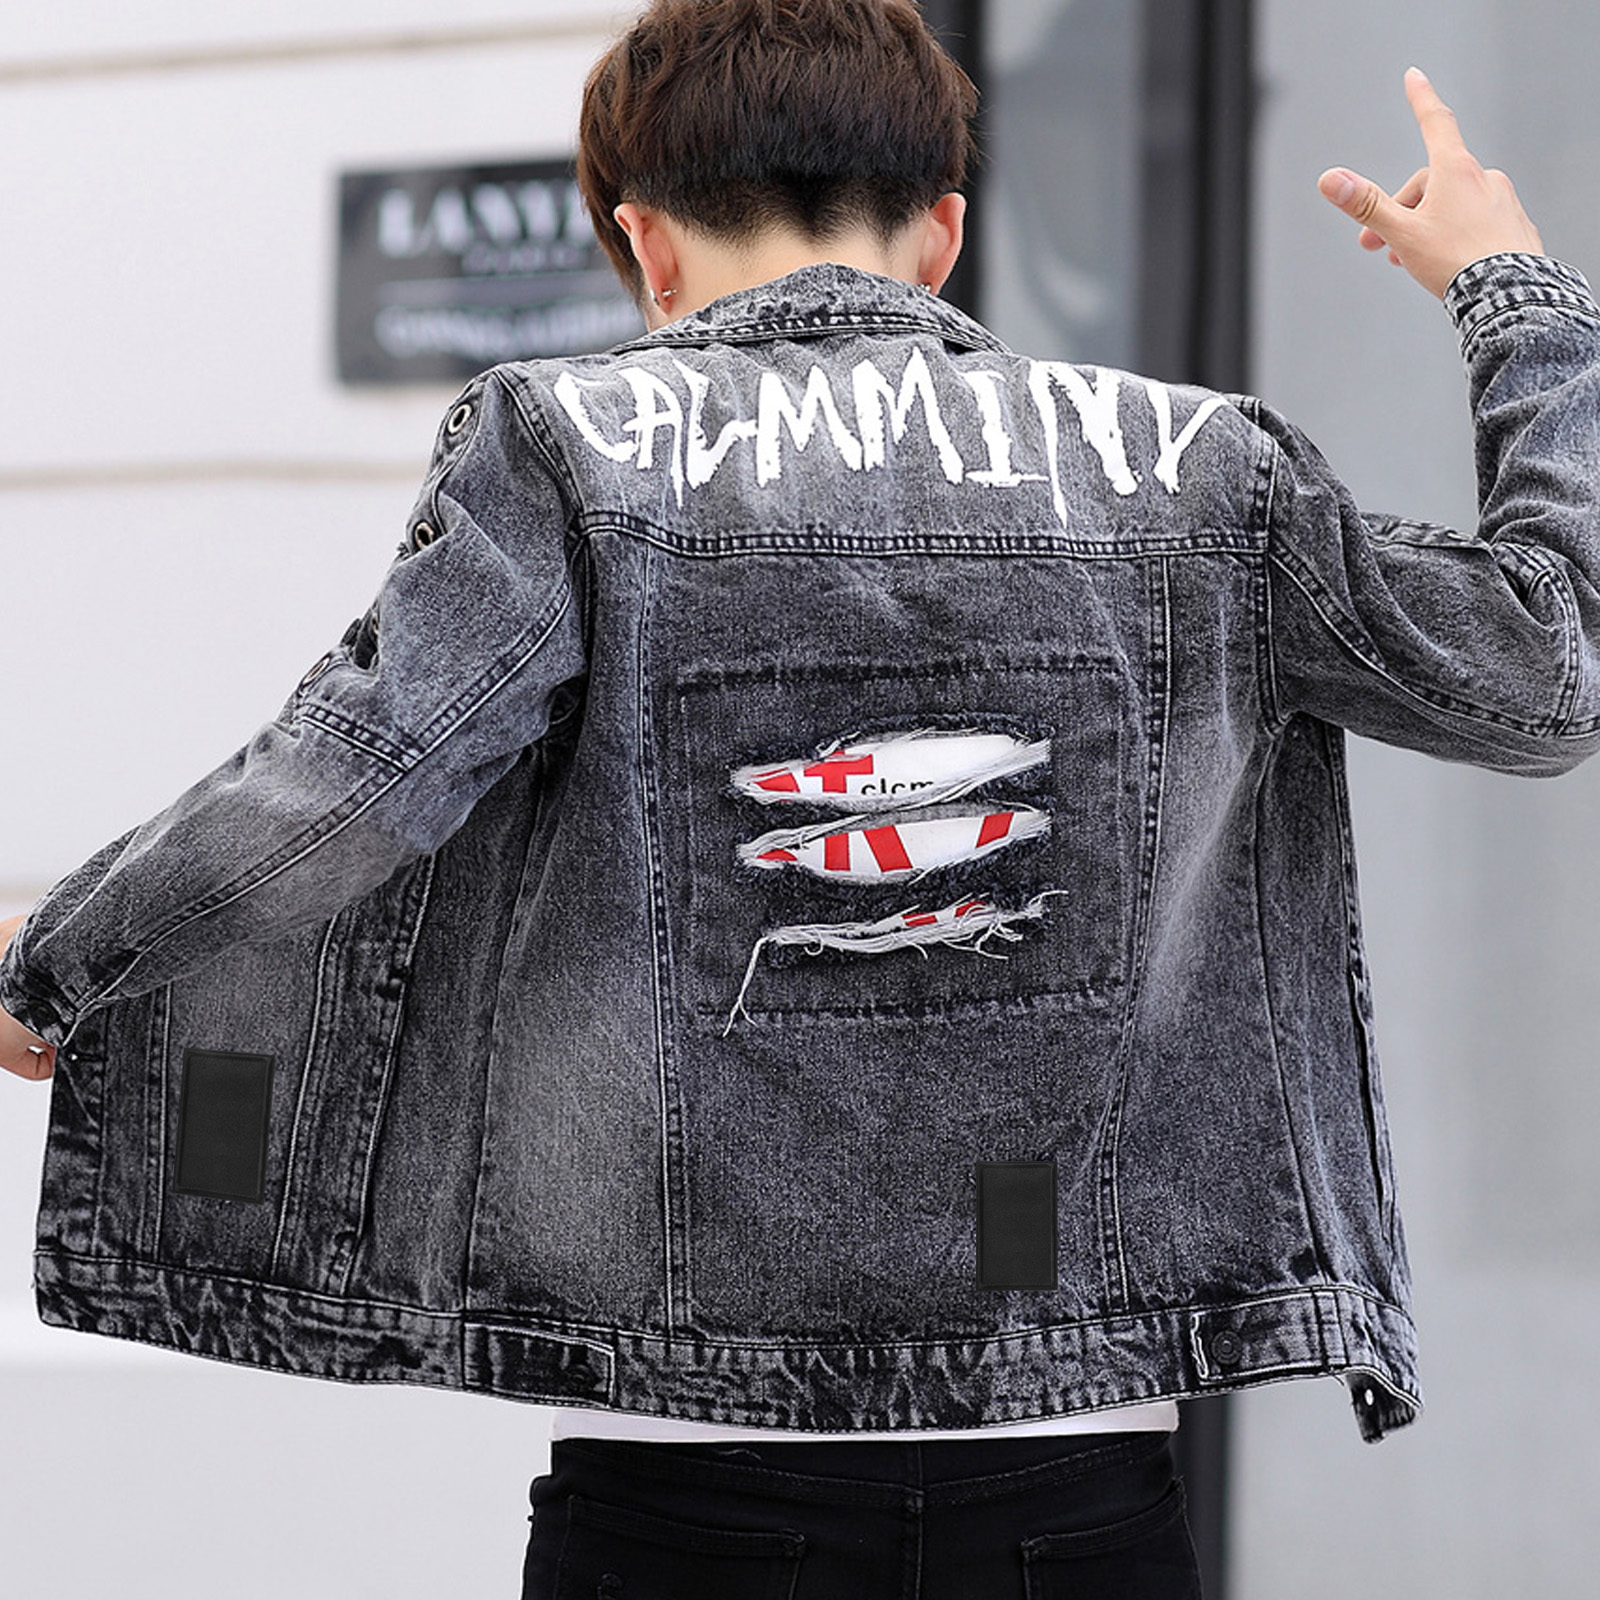 5pcs Iron on Fabric Patches For Clothes Sewing Patches Denim Jean Repair  Canvas Puffer Down Jacket (